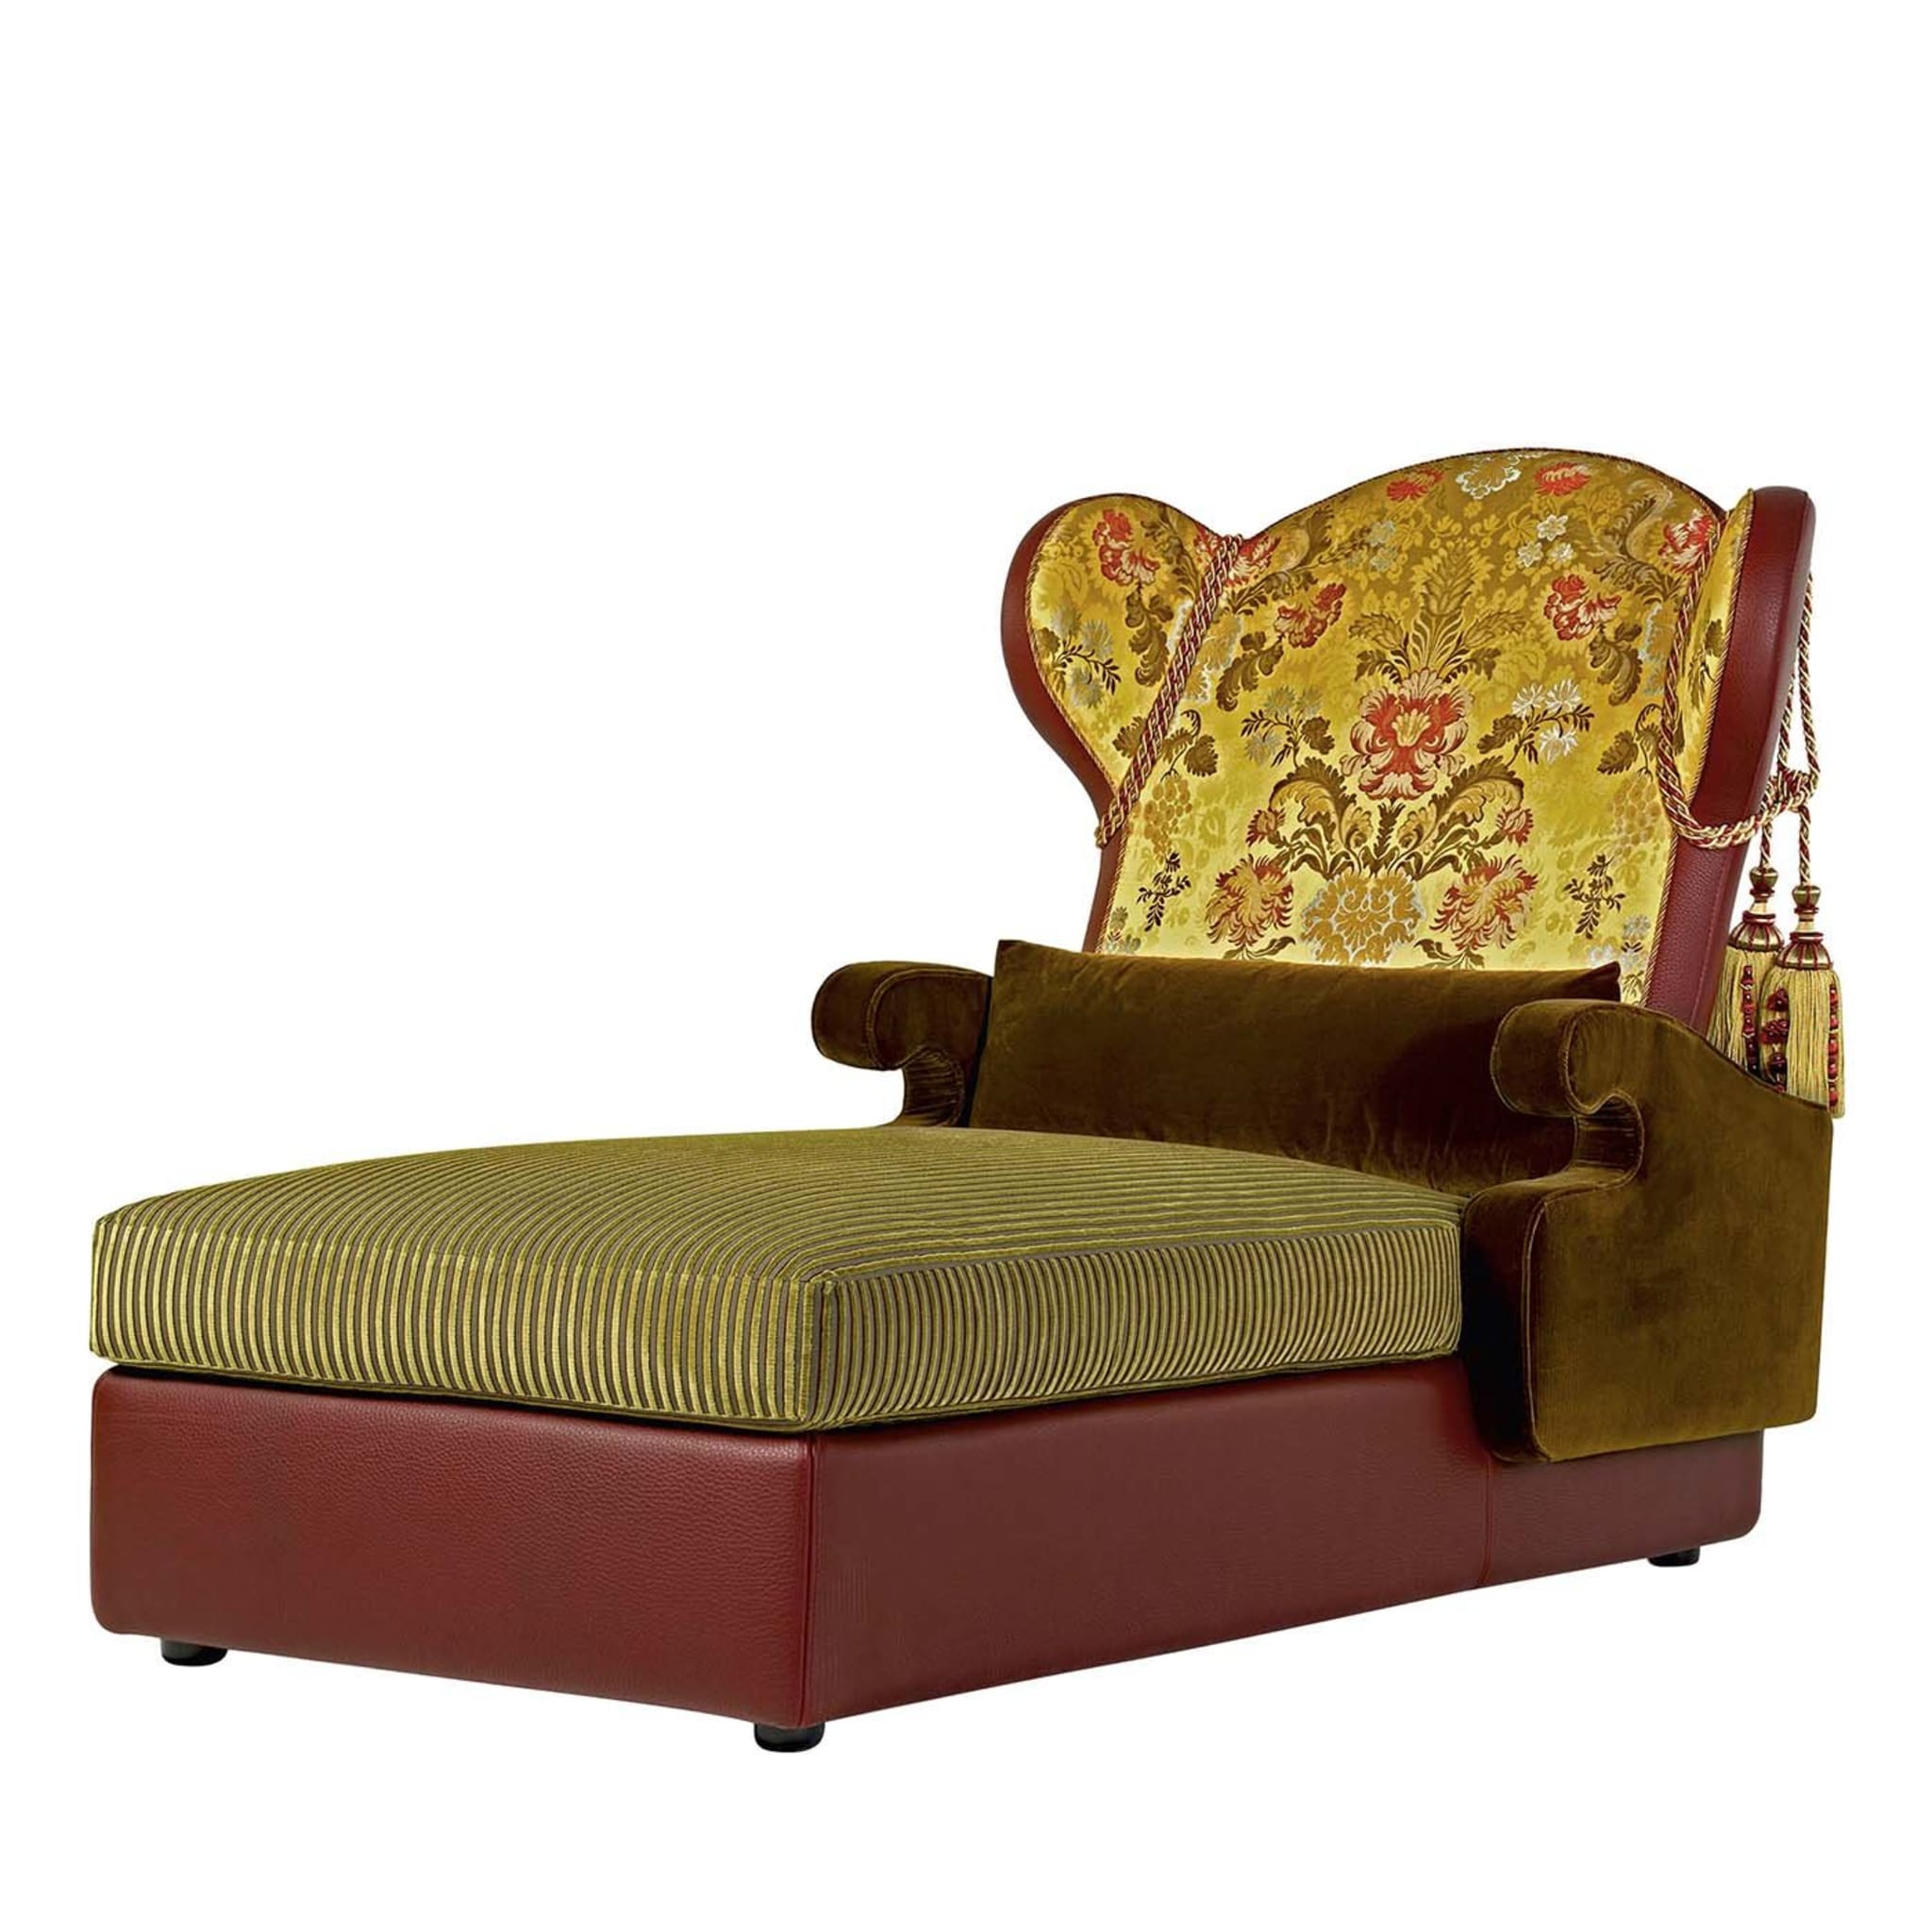 Justinien chaise longue - Main view